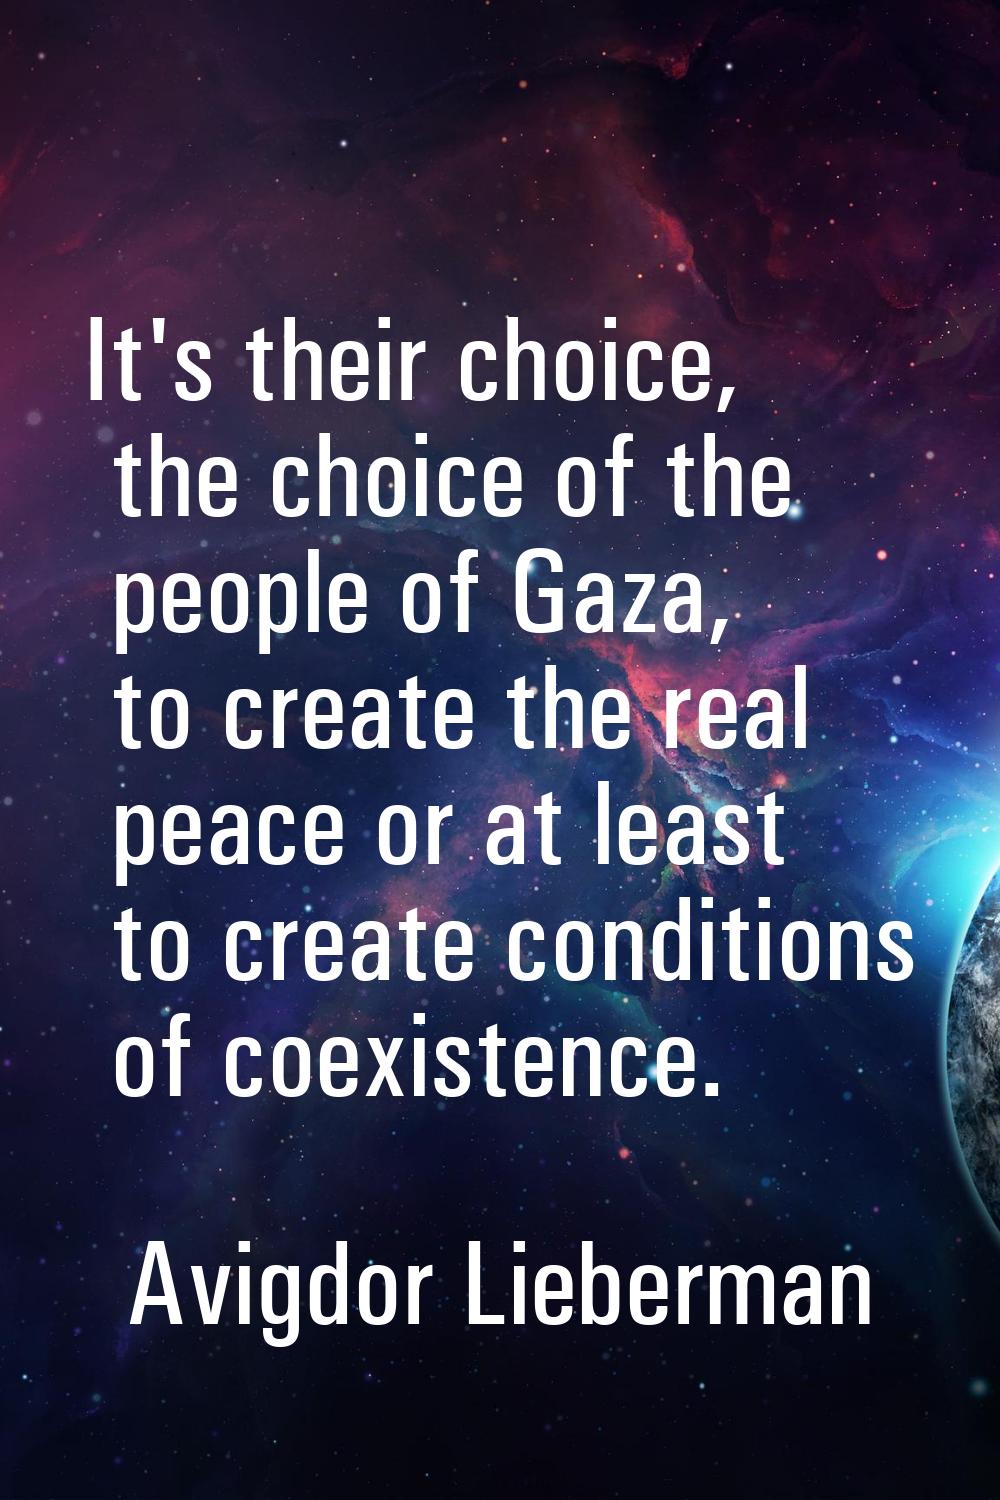 It's their choice, the choice of the people of Gaza, to create the real peace or at least to create